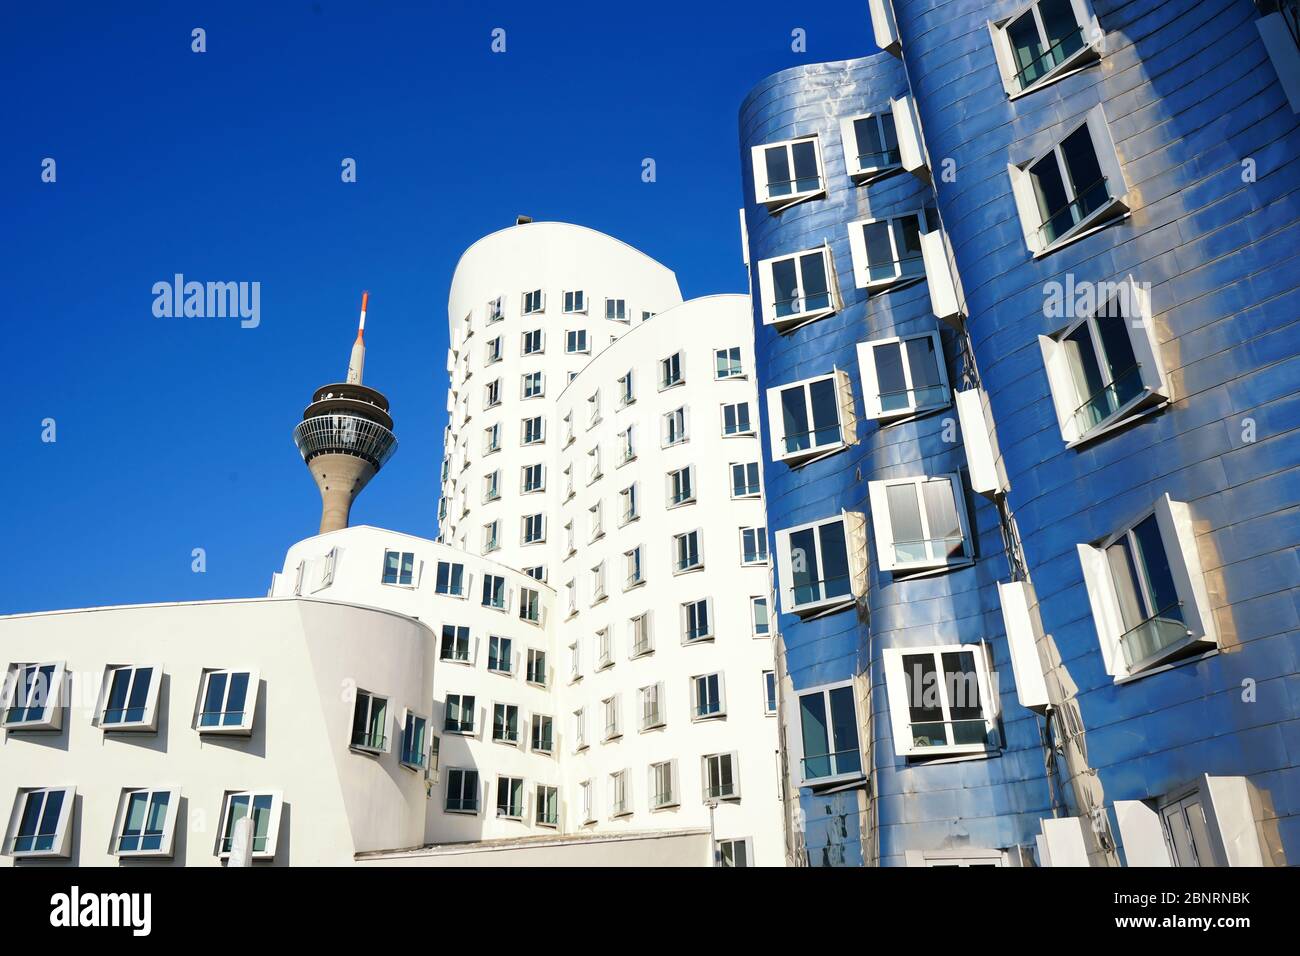 Buildings designed by the star architect Frank O. Gehry in Düsseldorf at 'Neuer Zollhof', Medienhafen /  Media Harbour. Sunny day with blue sky. Stock Photo